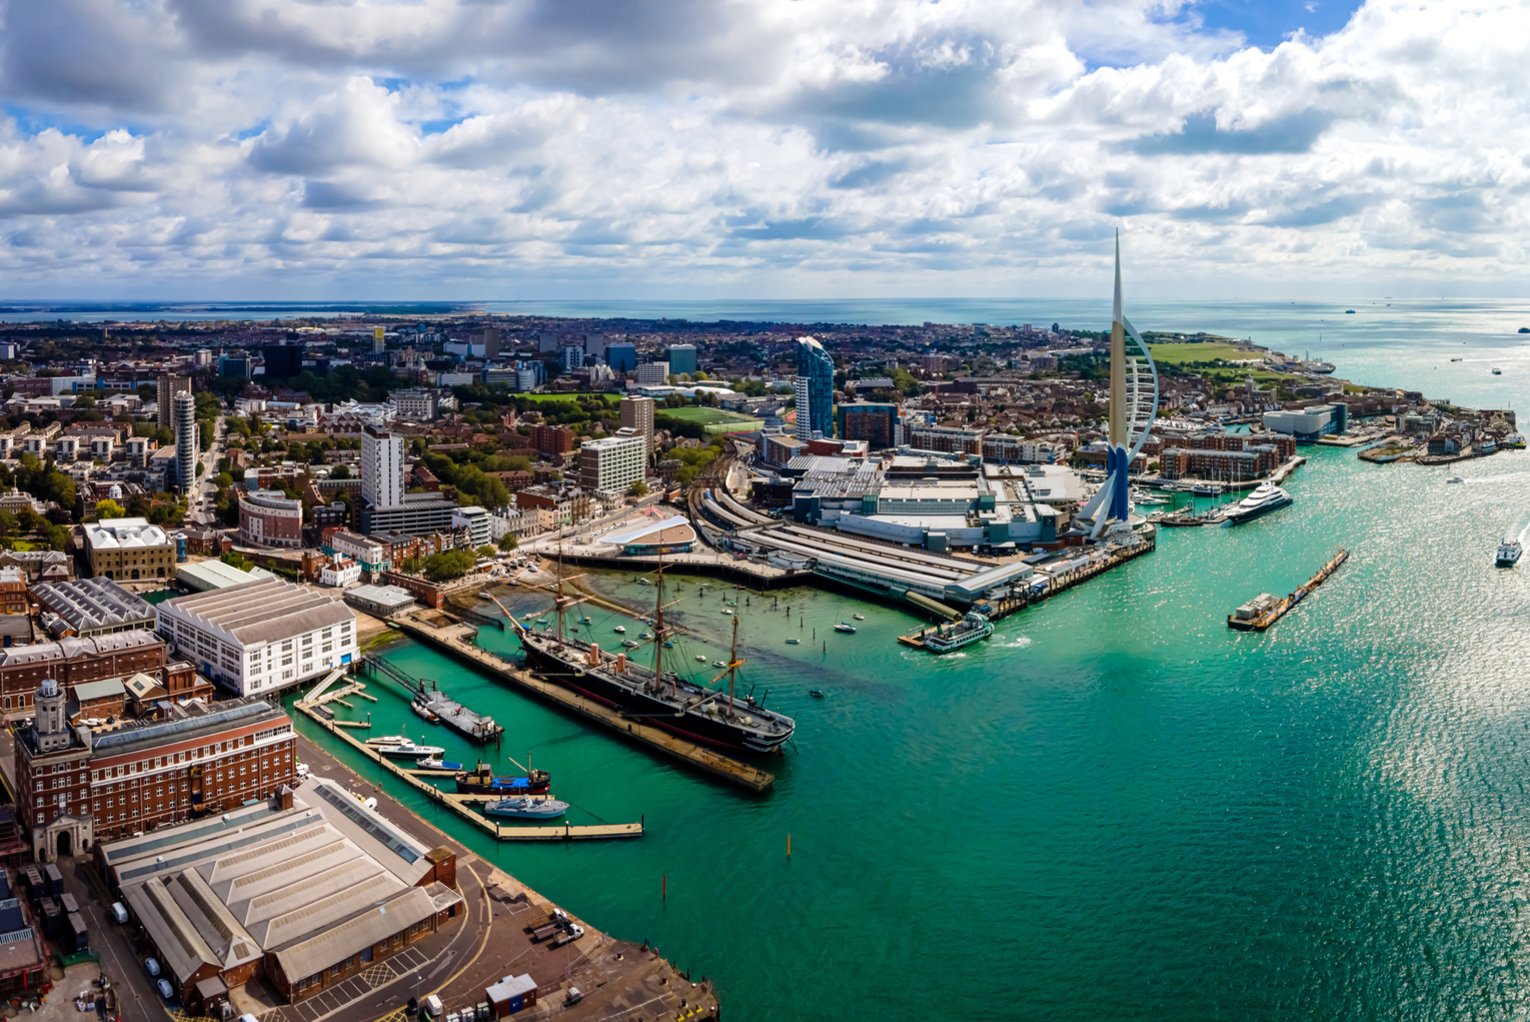 The harbour at Portsmouth showing boats in the water